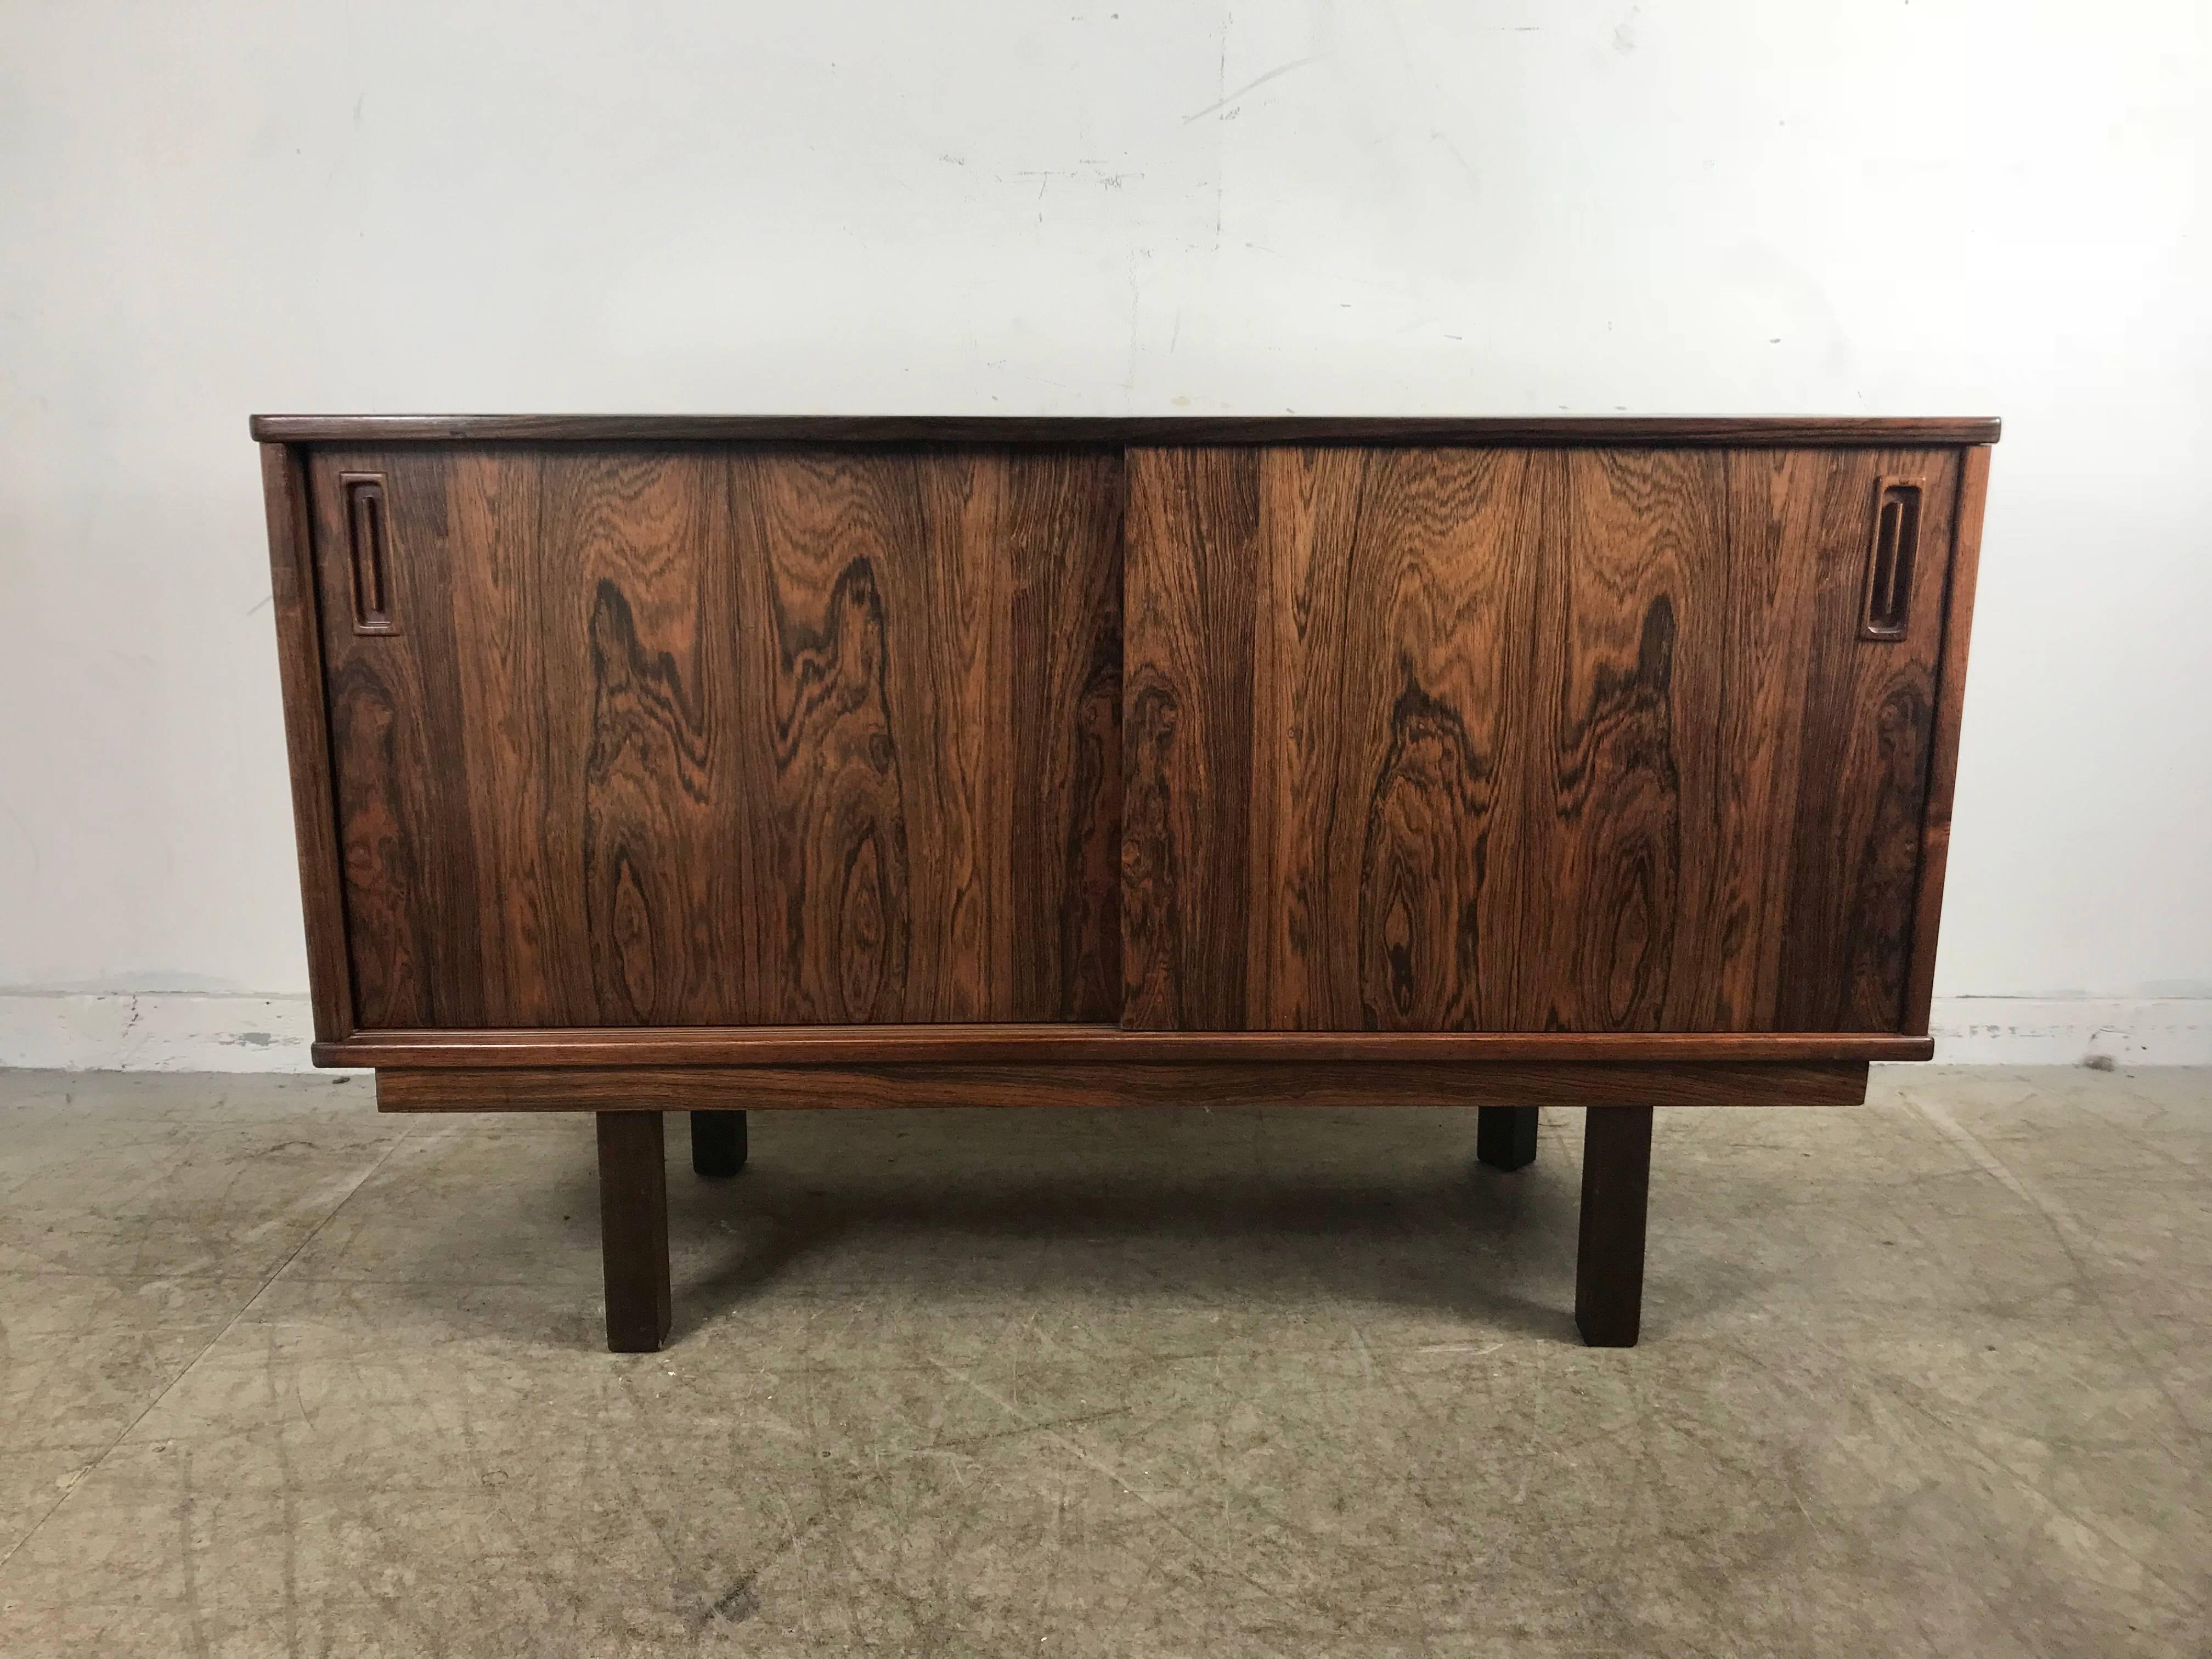 Stunning bookmatch rosewood credenza, cabinet by Drylund Denmark. Handsome cabinet with two sliding doors, shelf and drawer, simple, elegant design with stunning richly grained rosewood veneer, hand delivery avail to New York City or anywhere en